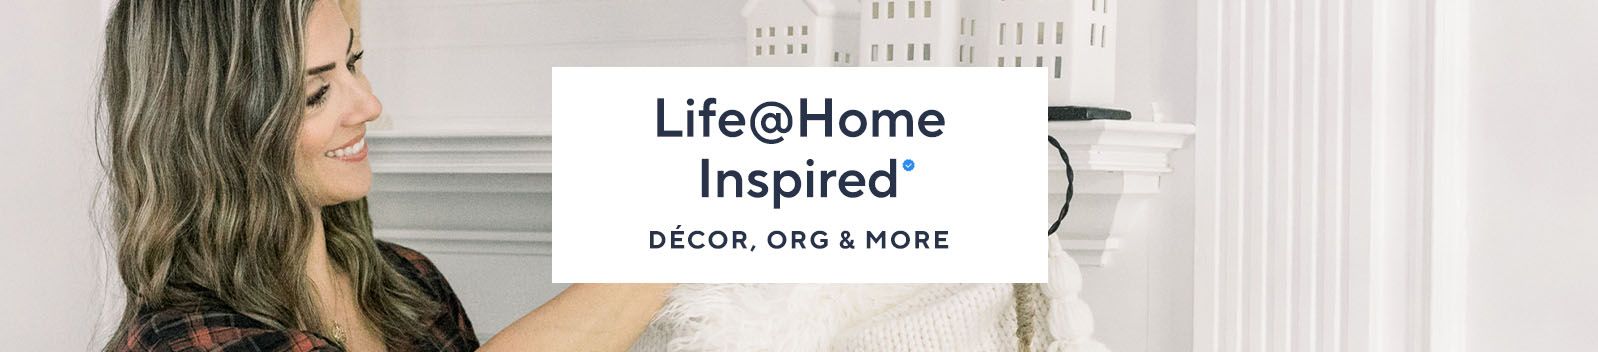 Life @ Home Inspired Décor, Org & More 